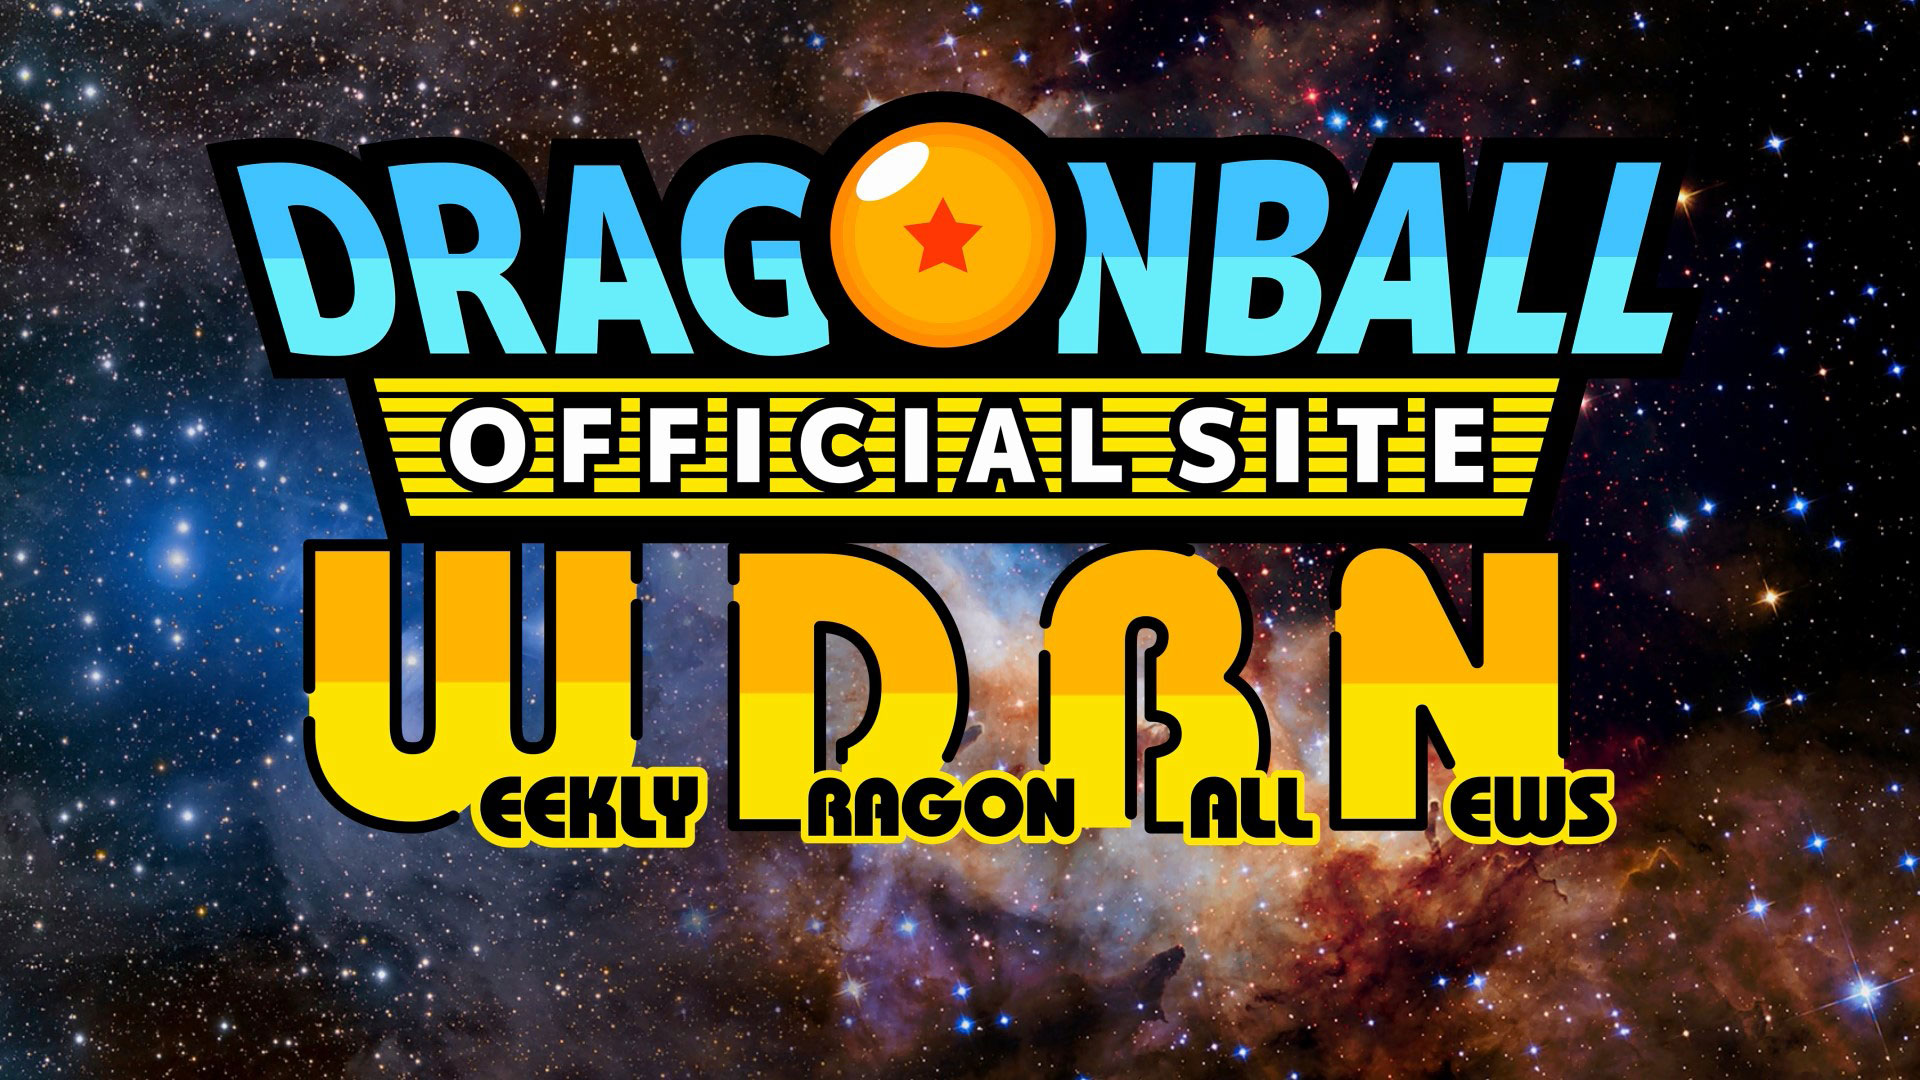 May 17th Weekly Dragon Ball News Broadcast! | DRAGON BALL OFFICIAL SITE